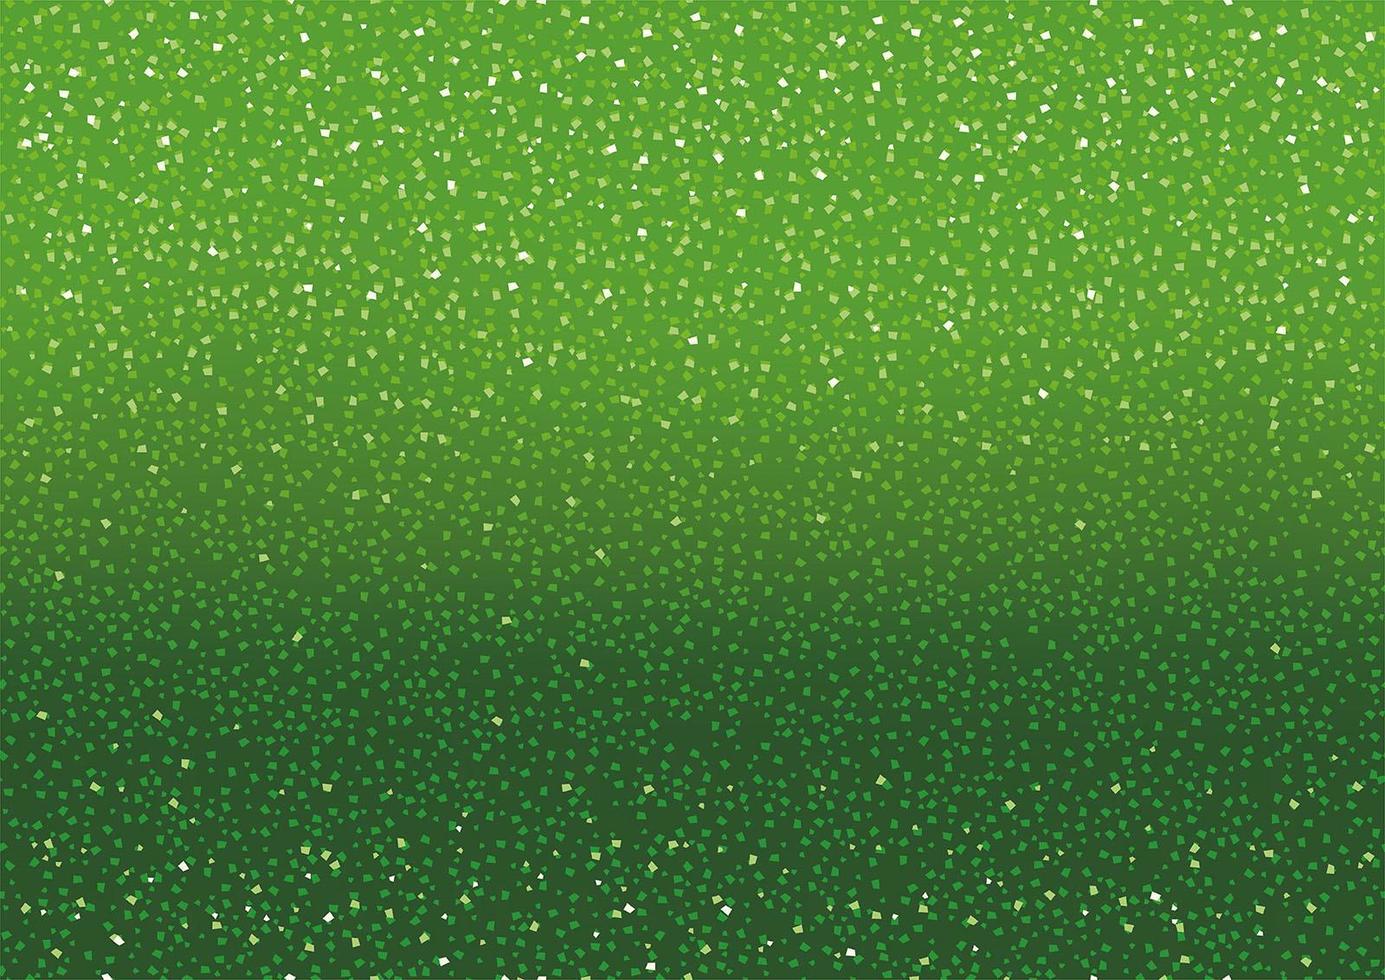 Green background with glitters and sparkles vector